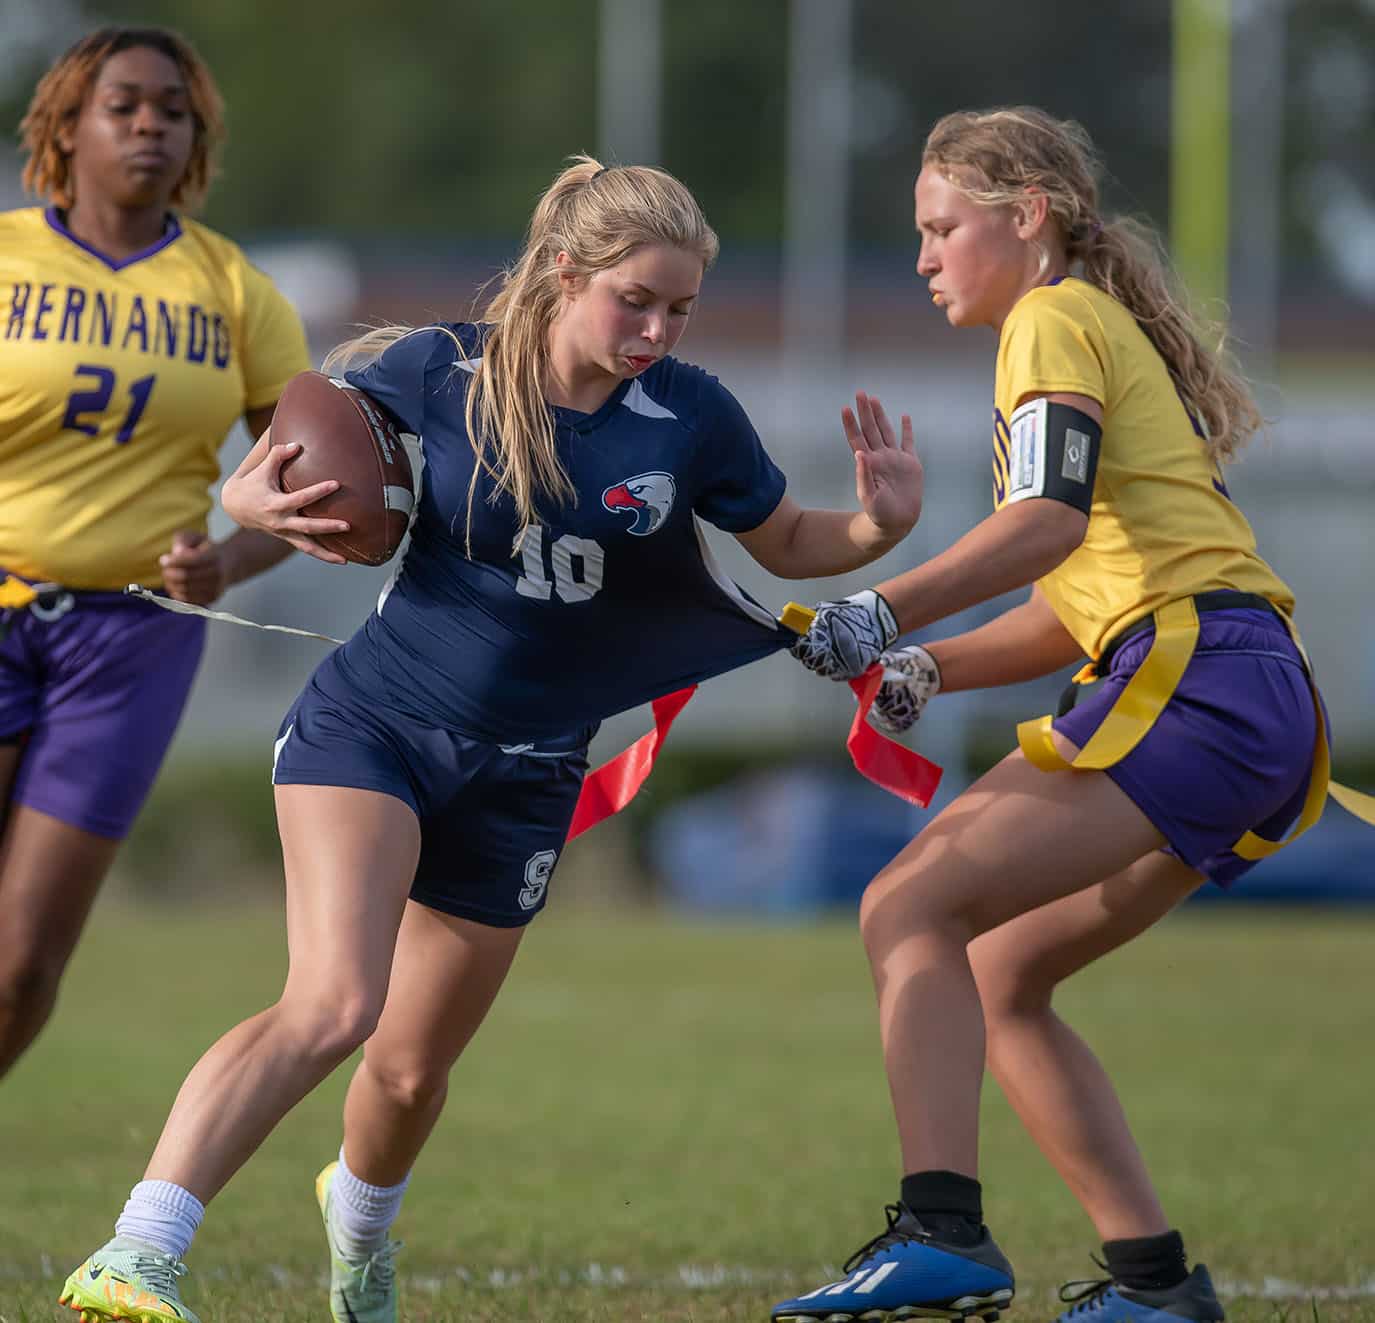 Springstead High’s, 10, couldn’t elude the tackle by Hernando High’s Kasee Grant Monday at Booster Stadium. Photo by JOE DiCRISTOFALO